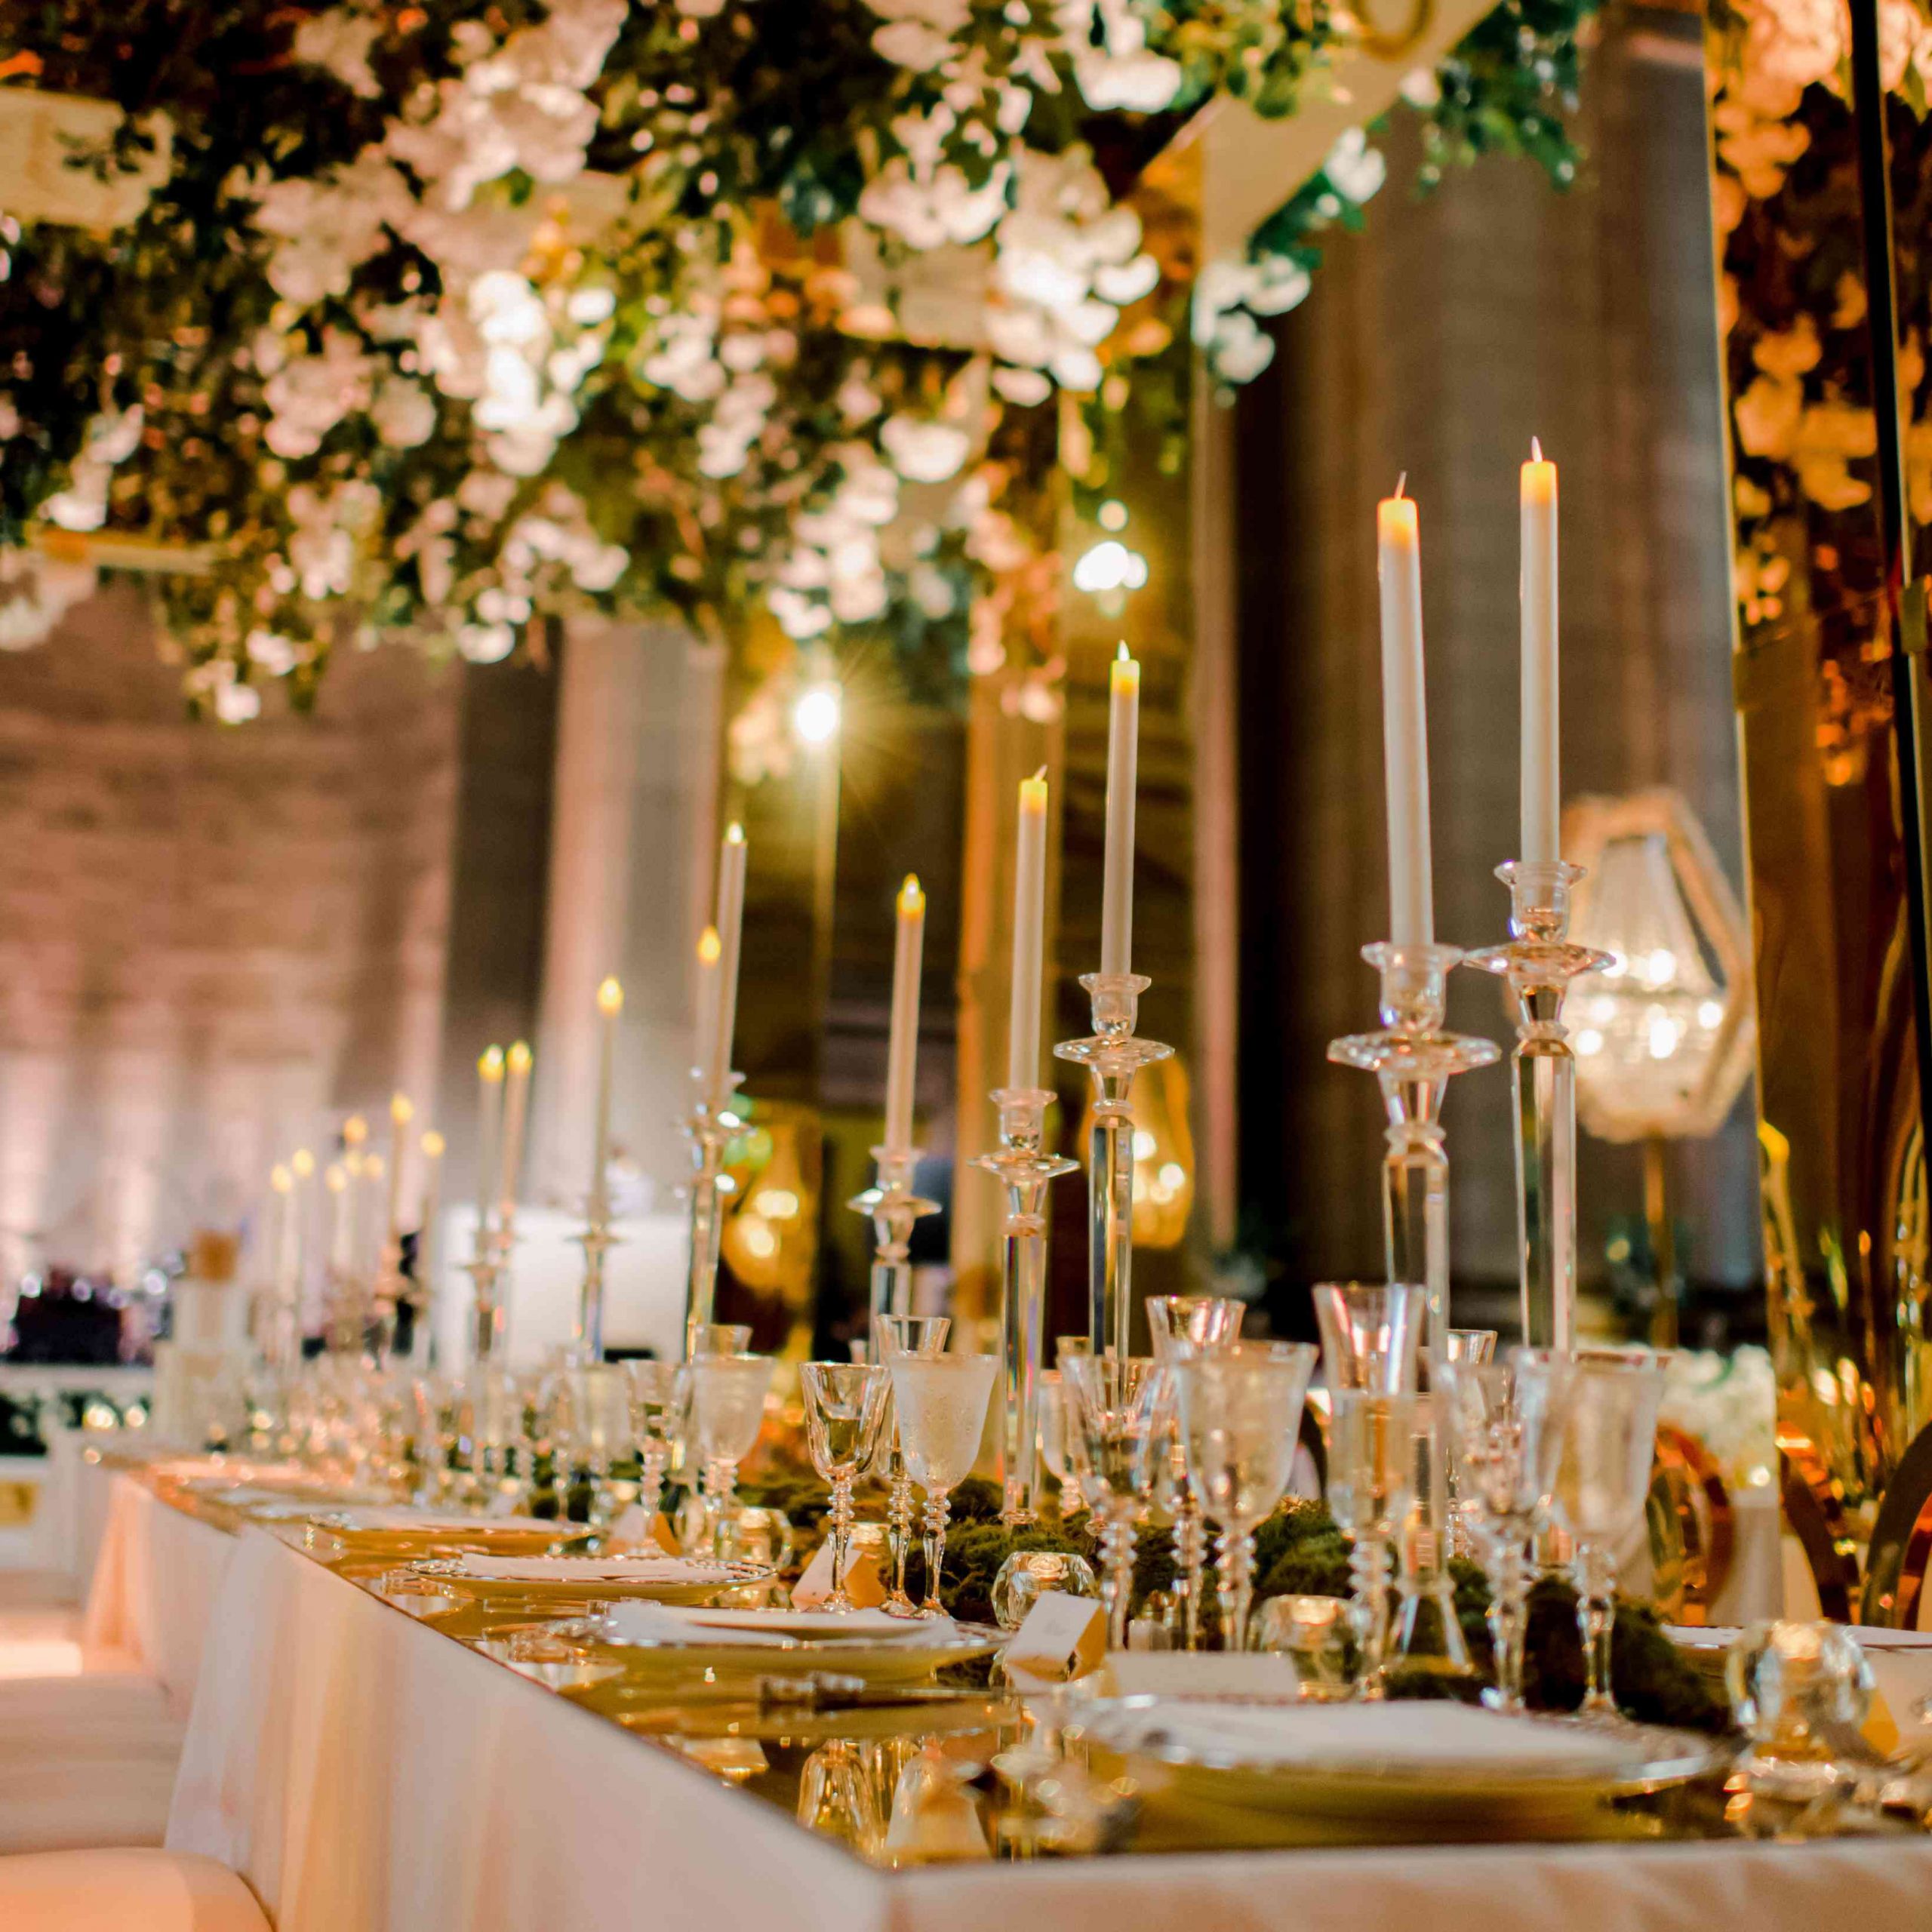 What to Do With Wedding Decorations After Your Reception Comes to an End